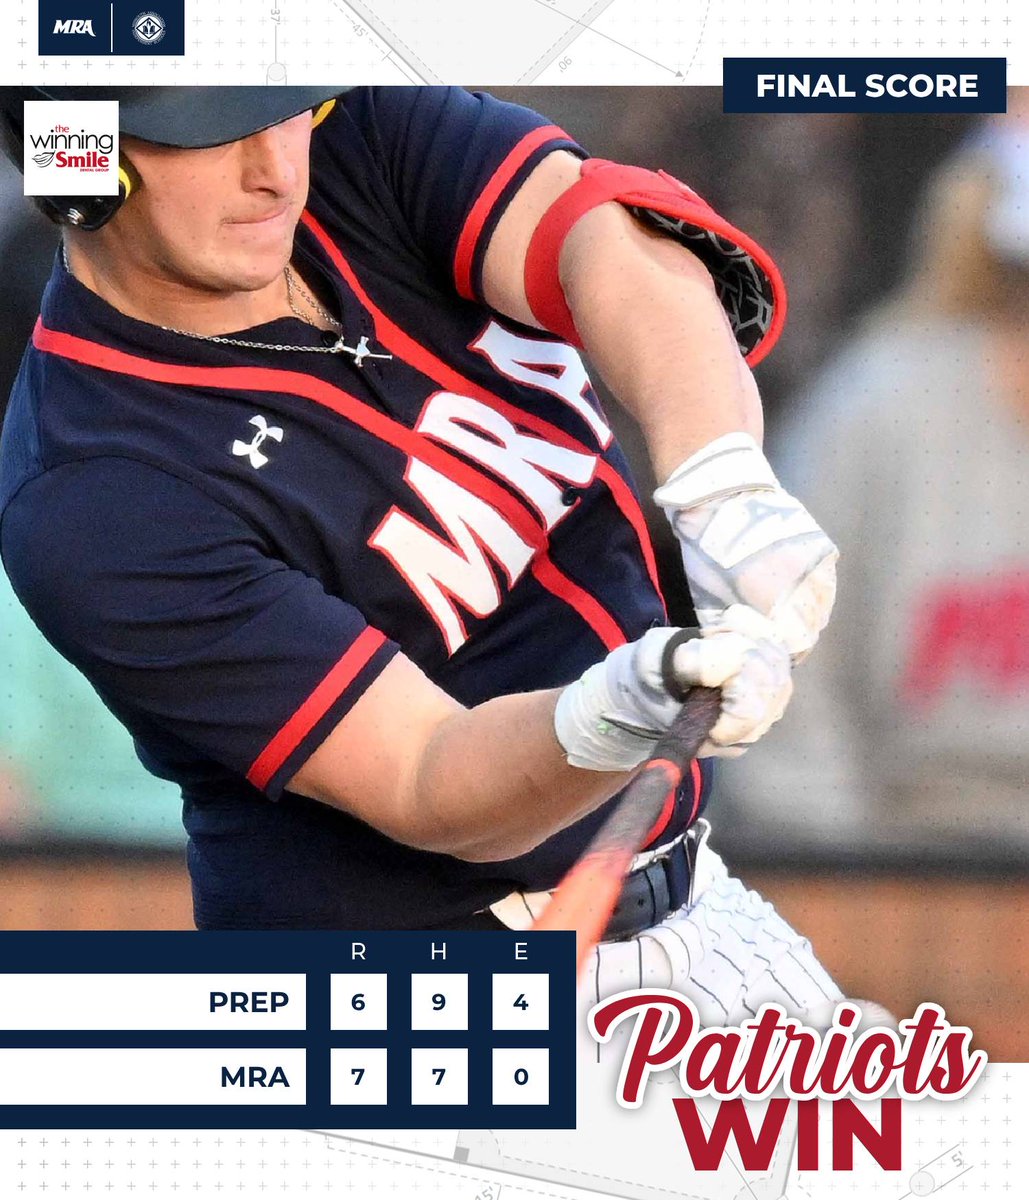 𝐌𝐑𝐀 𝐖𝐈𝐍𝐒 MRA captures game two 7-6 over Jackson Prep, and forces a game three Friday night in Flowood. First pitch will be at 6:00 pm.